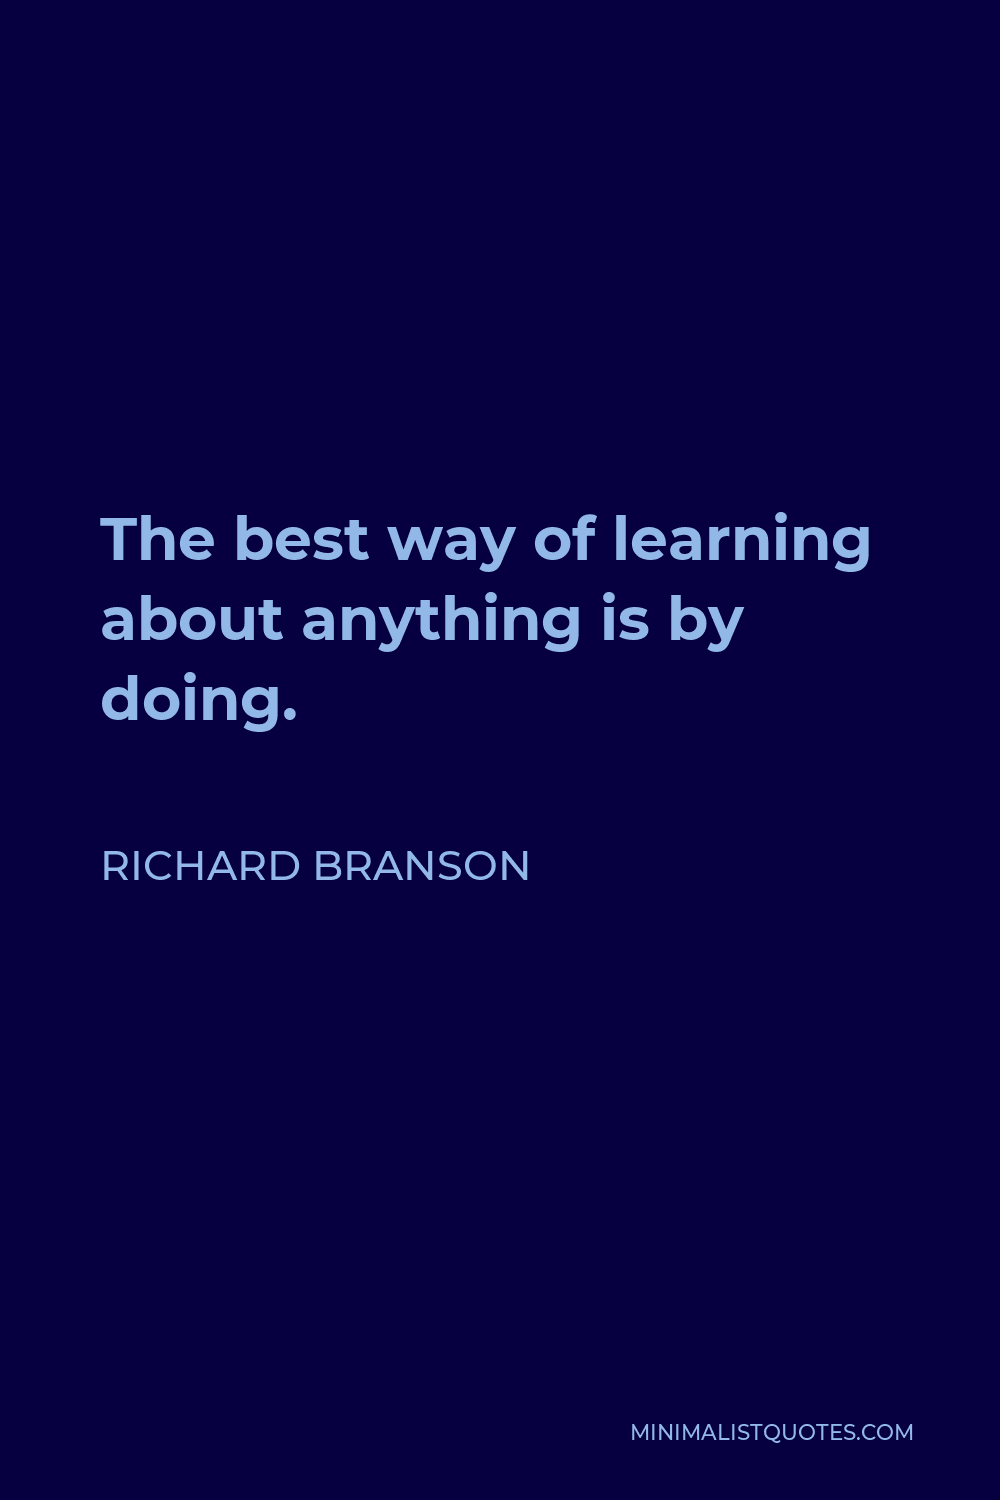 Richard Branson Quote - The best way of learning about anything is by doing.